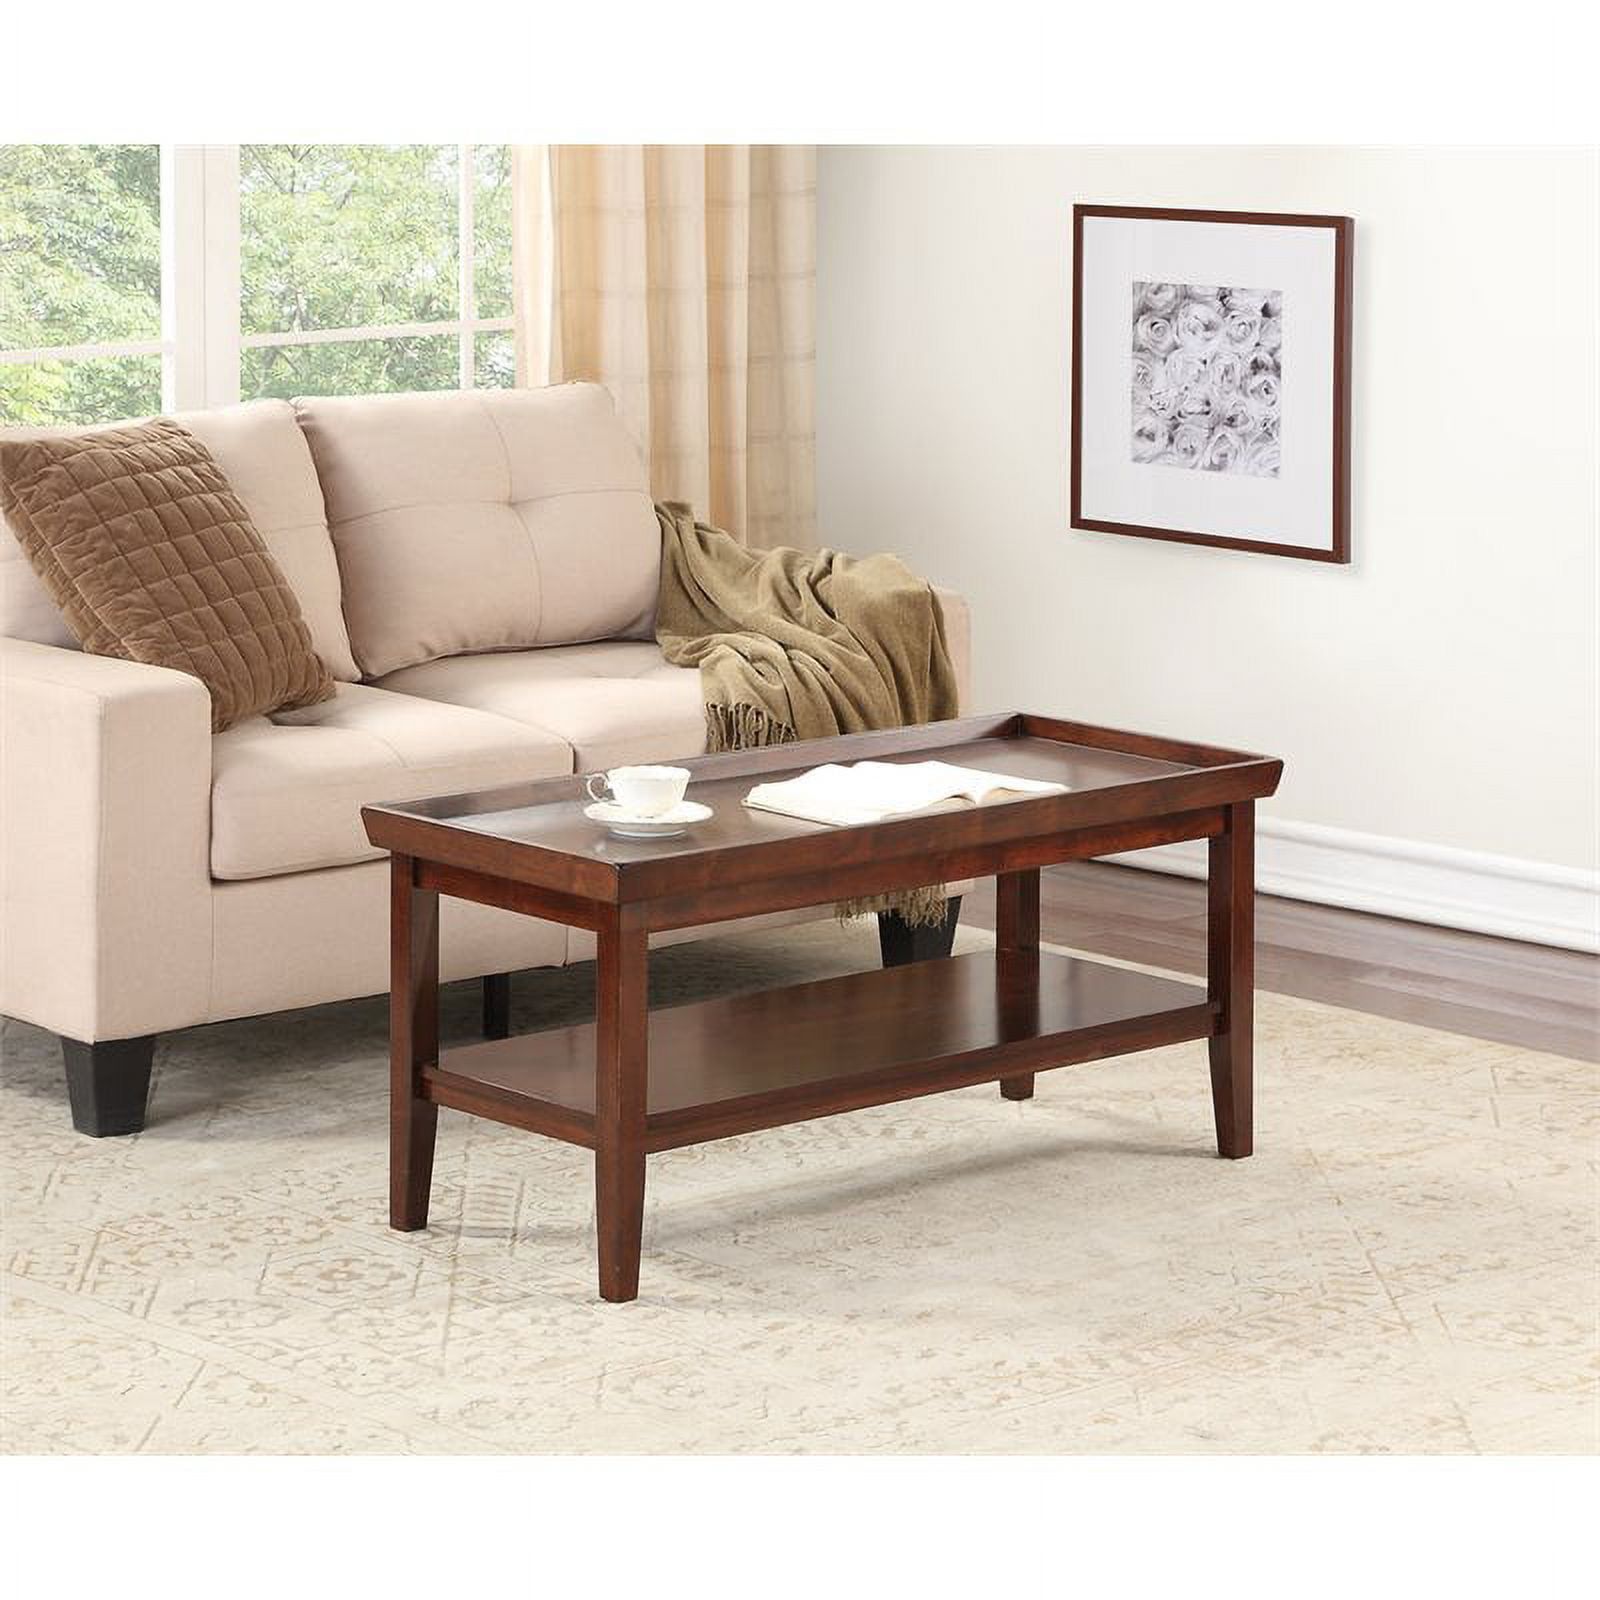 Pemberly Row Coffee Table In Espresso Wood Finish – Walmart For Espresso Wood Finish Coffee Tables (Photo 11 of 15)